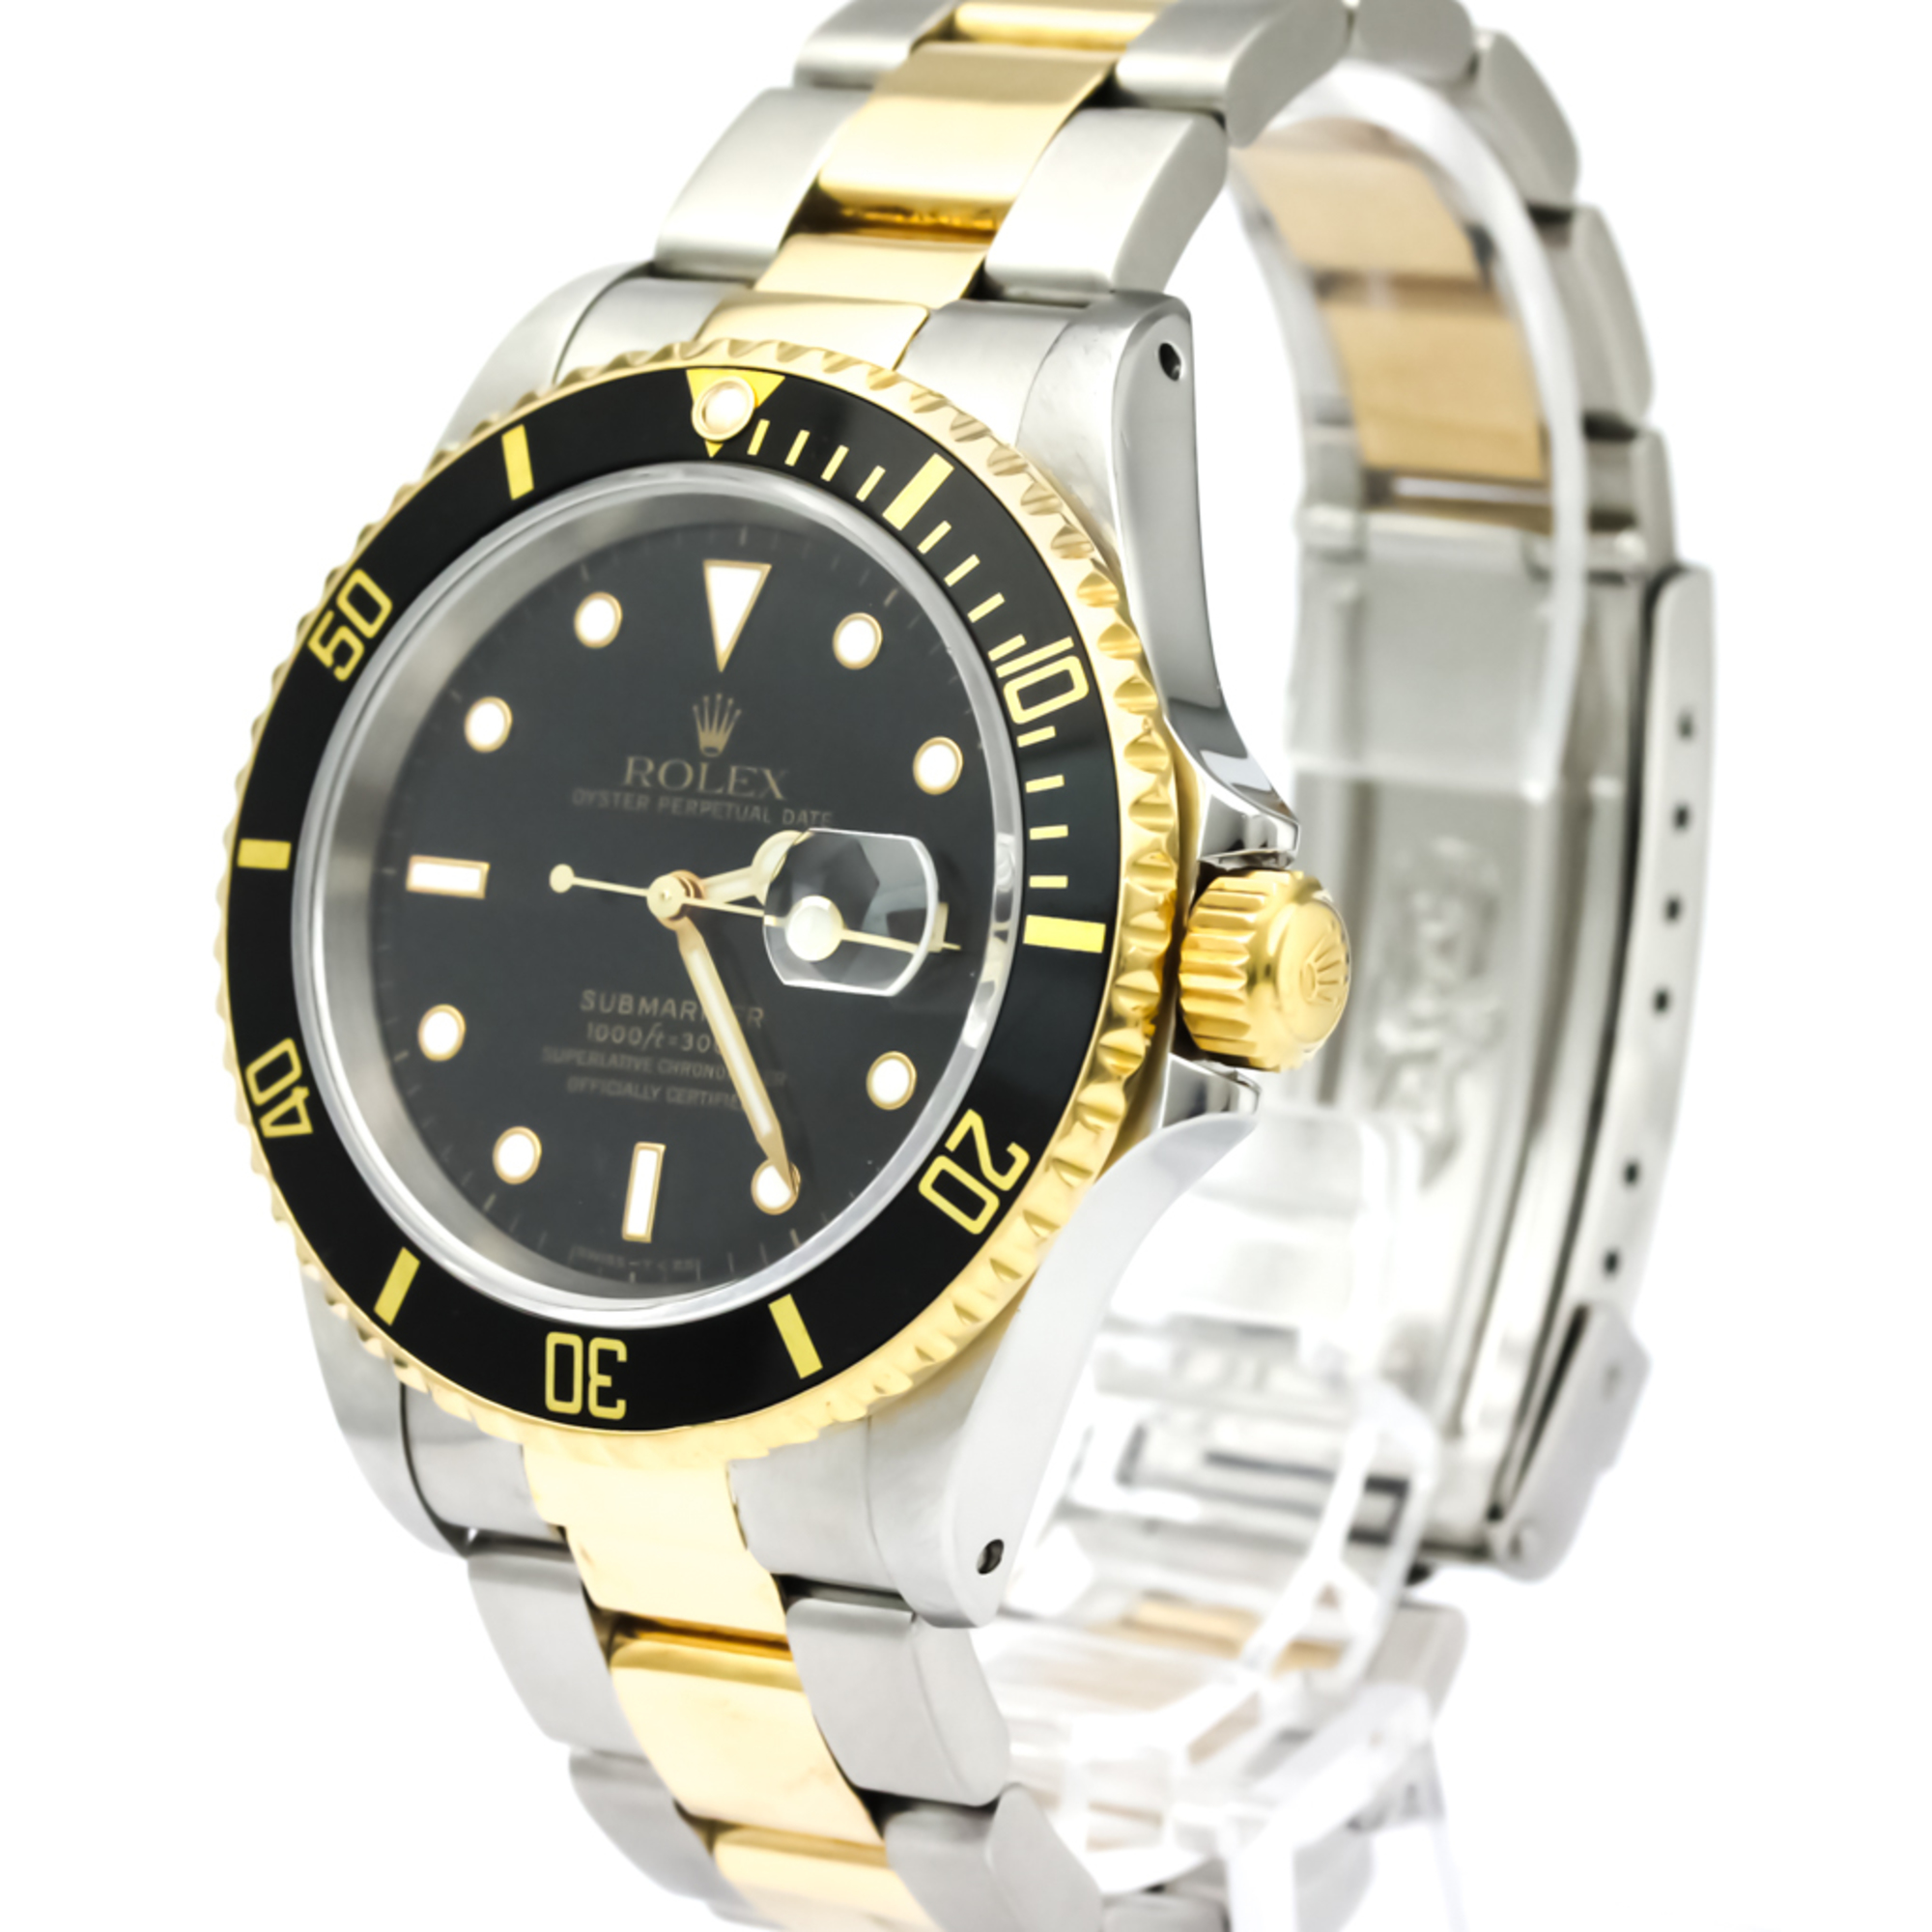 Rolex Submariner Automatic Stainless Steel,Yellow Gold (18K) Men's Sports Watch 16613